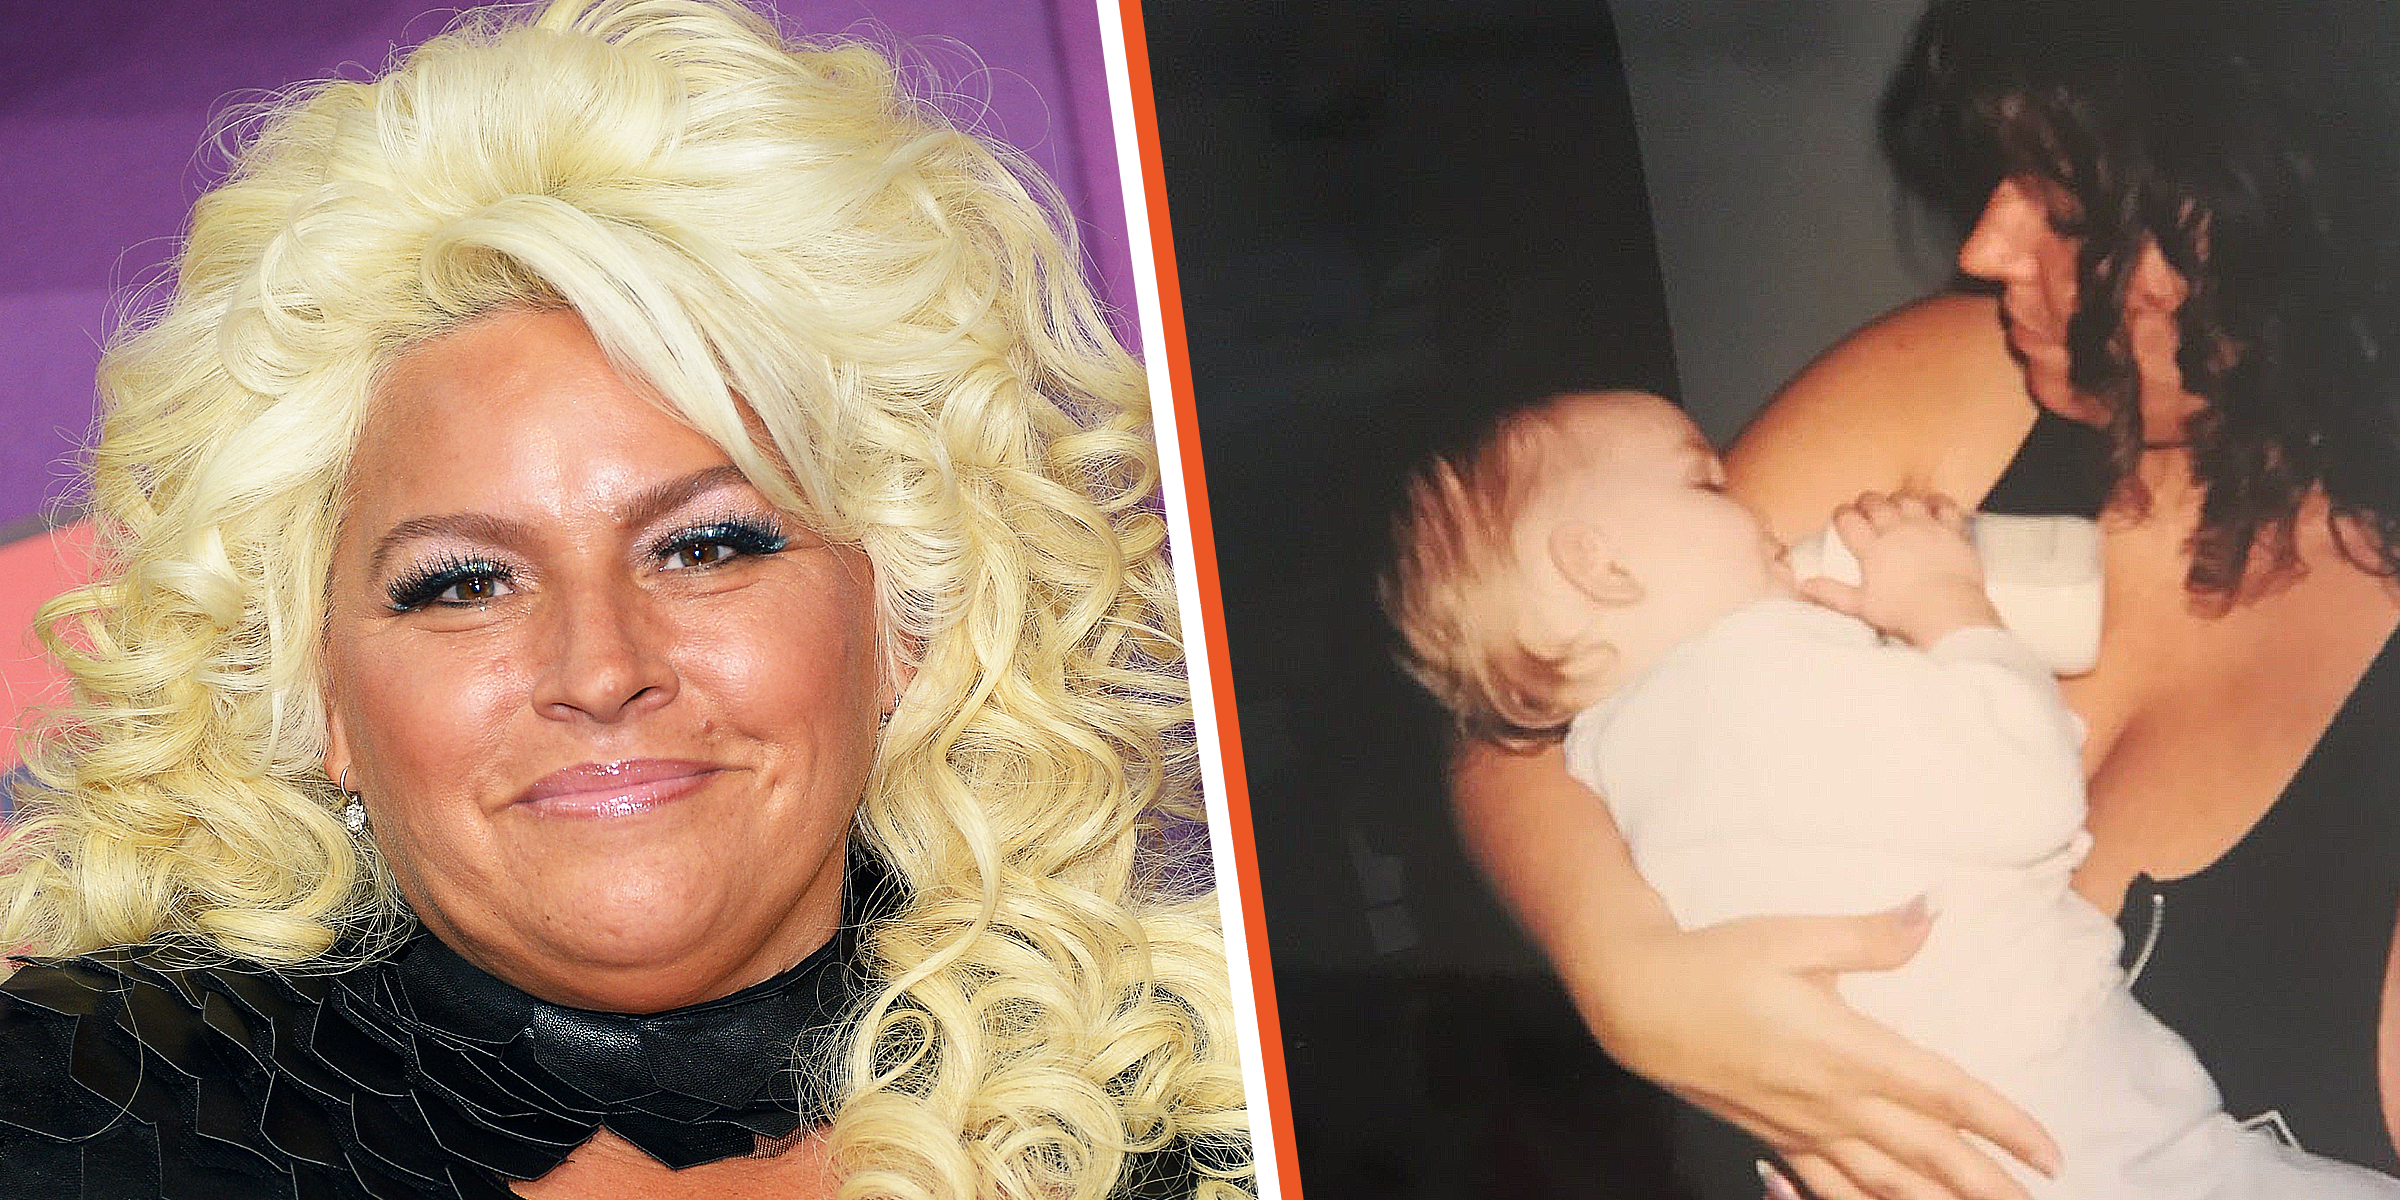 Beth Chapman | Beth Chapman holding one of her daughters. | Sources: Getty Images | Instagram/bonniejoc